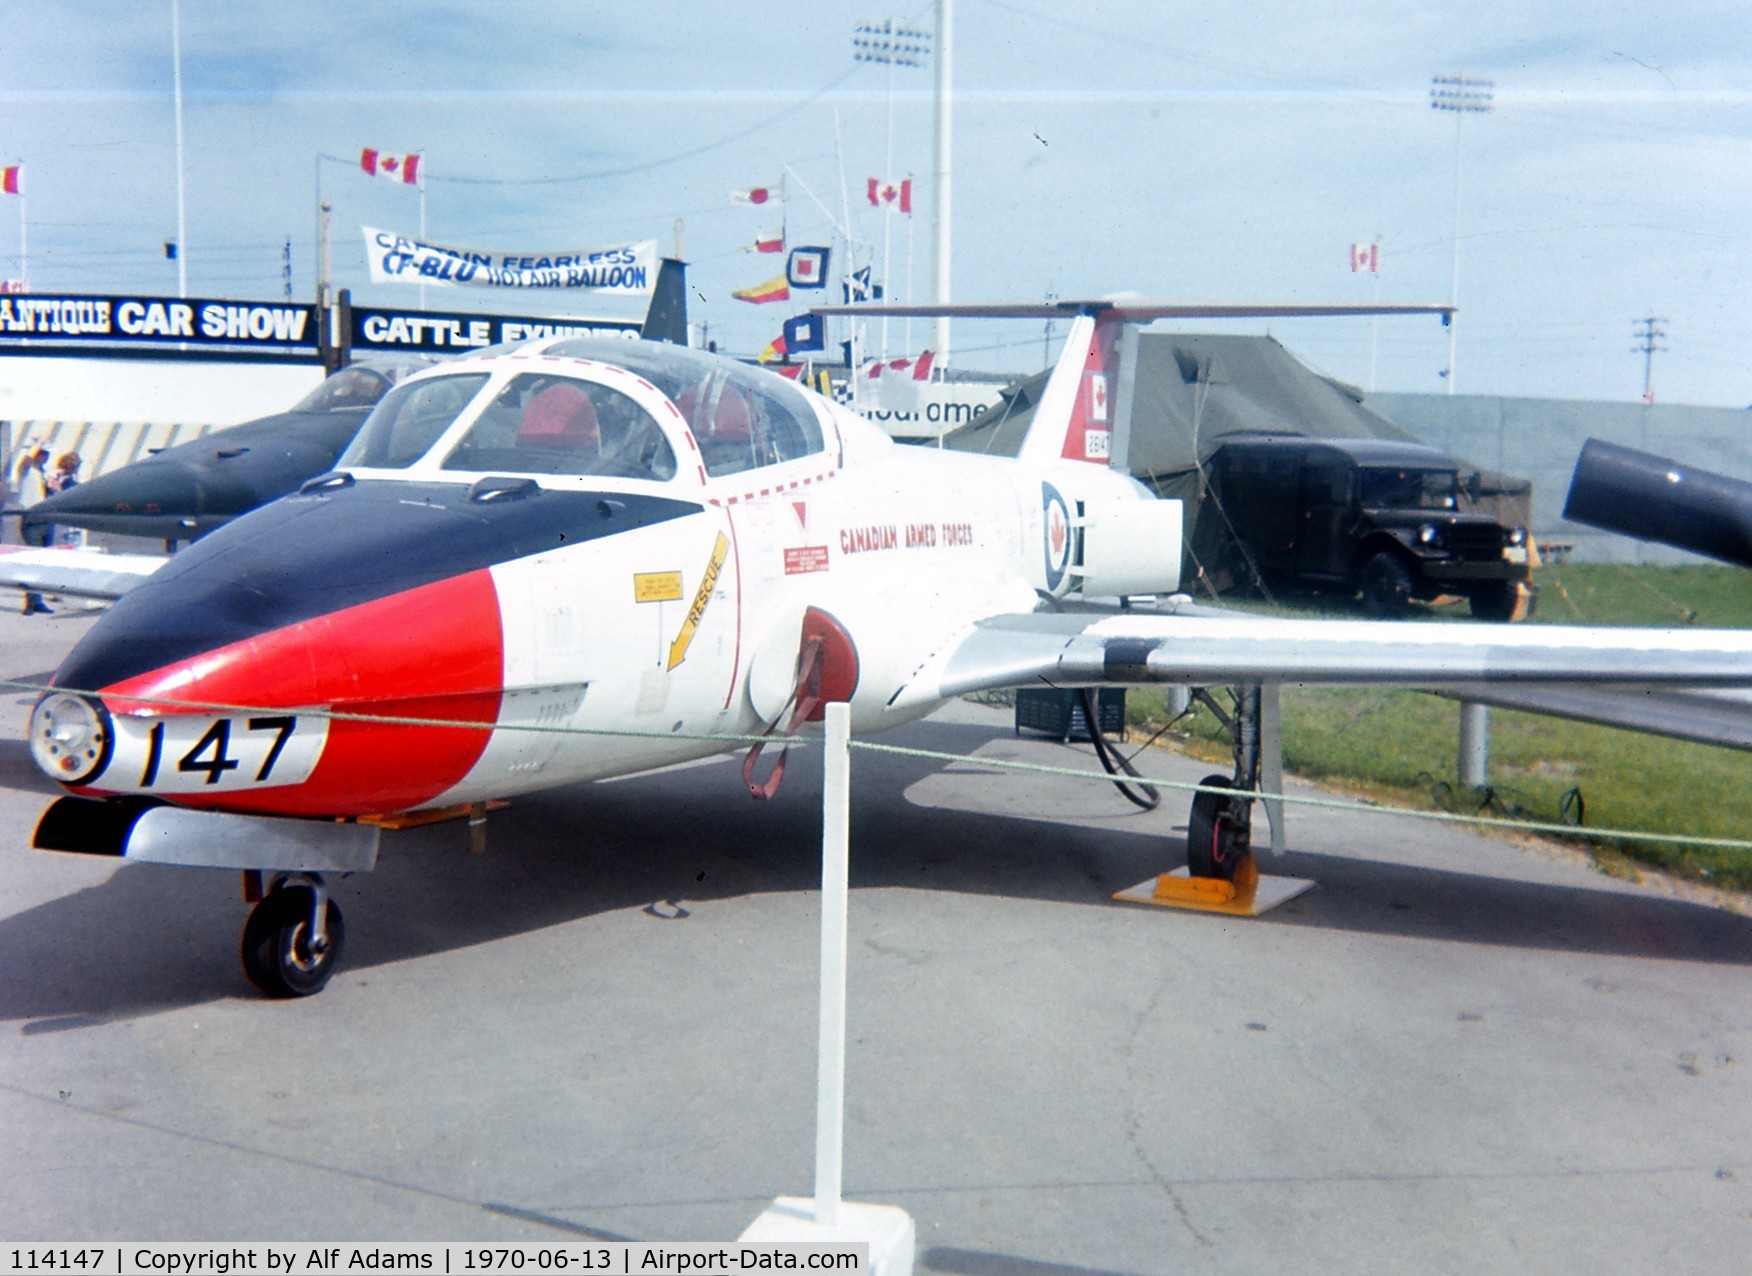 114147, 1971 Canadair CT-114 Tutor C/N 1147, Displayed at the Red River Exhibition in Winnipeg, Manitoba, Canada in 1970.